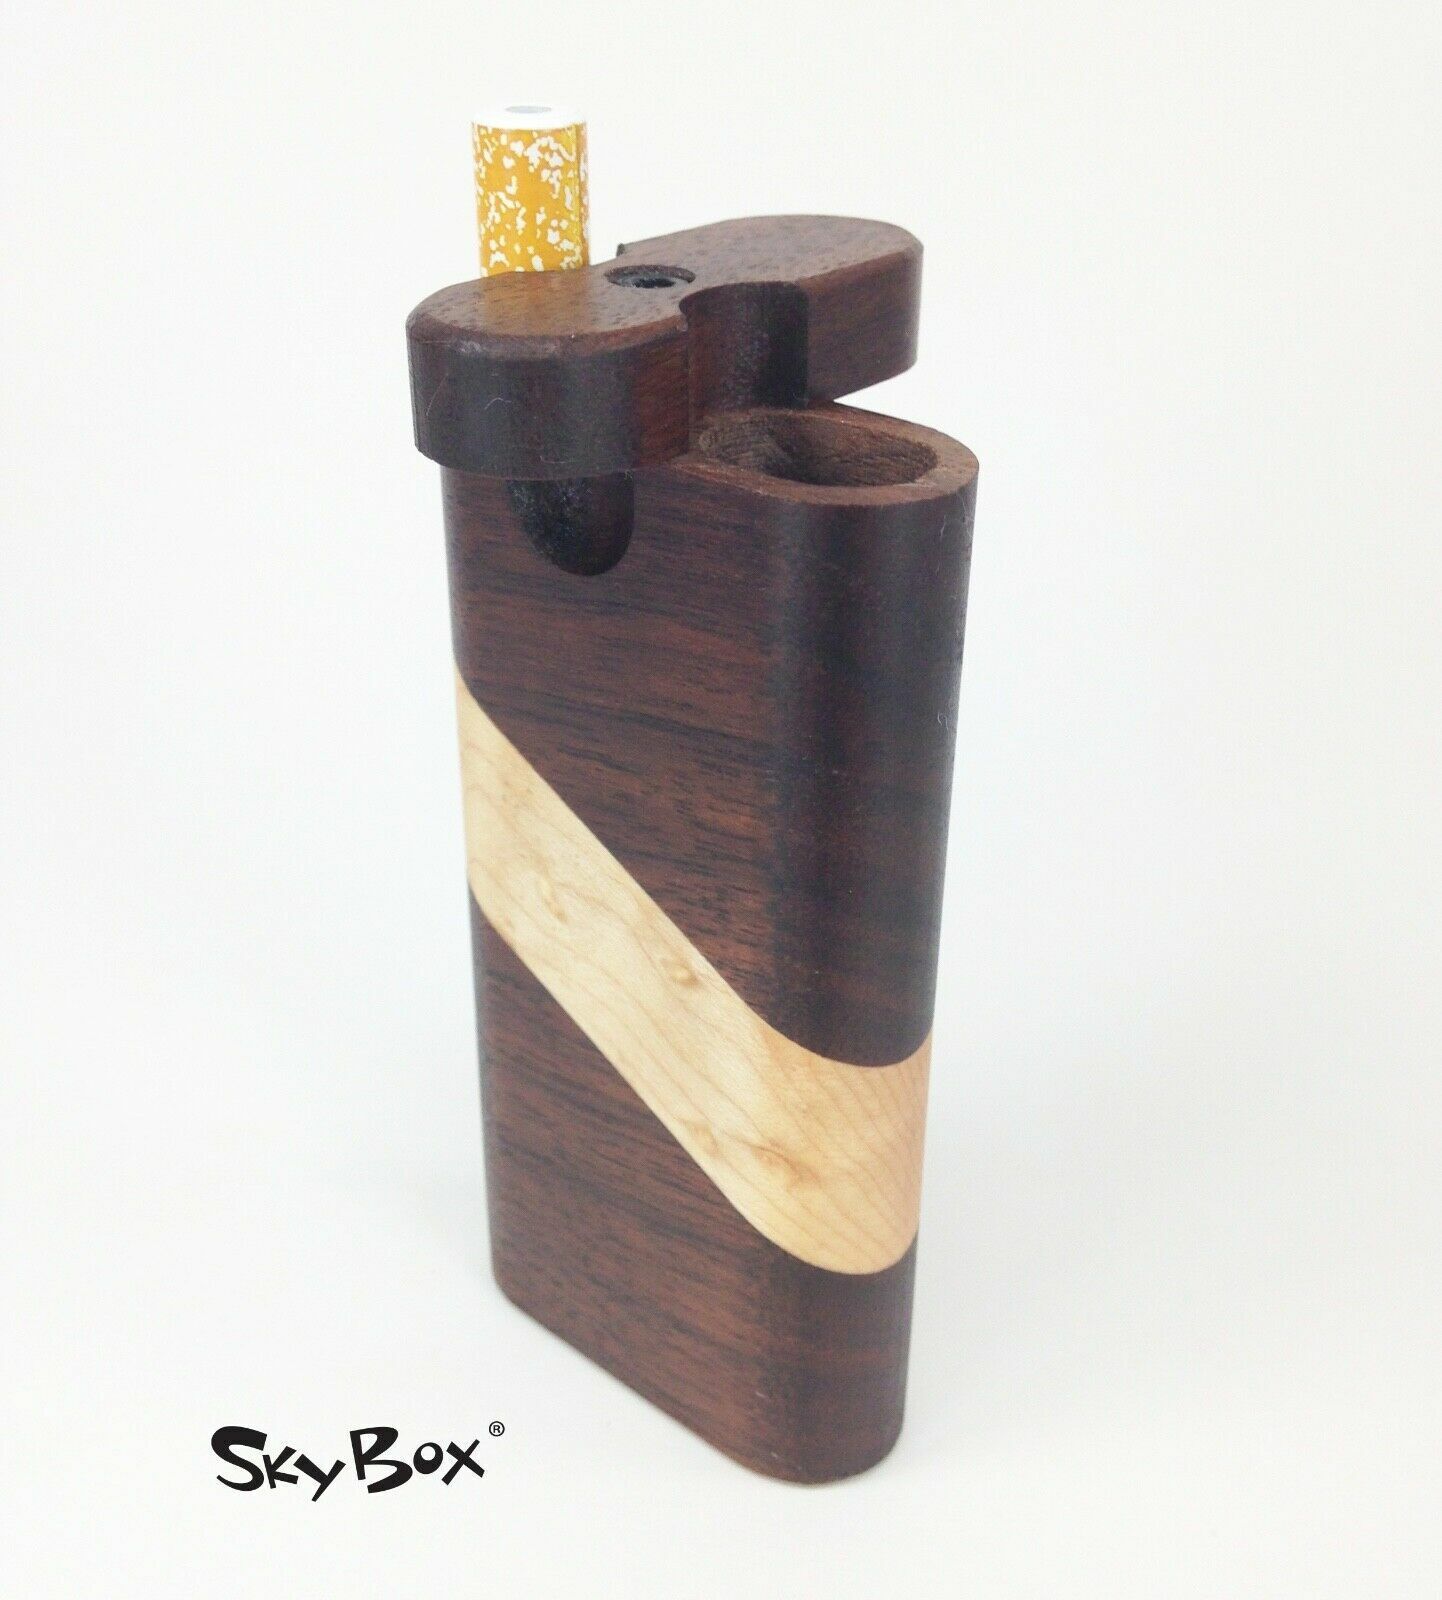 SkyBox® dugout with cigarette style one hitter - Walnut with Birds Eye Maple